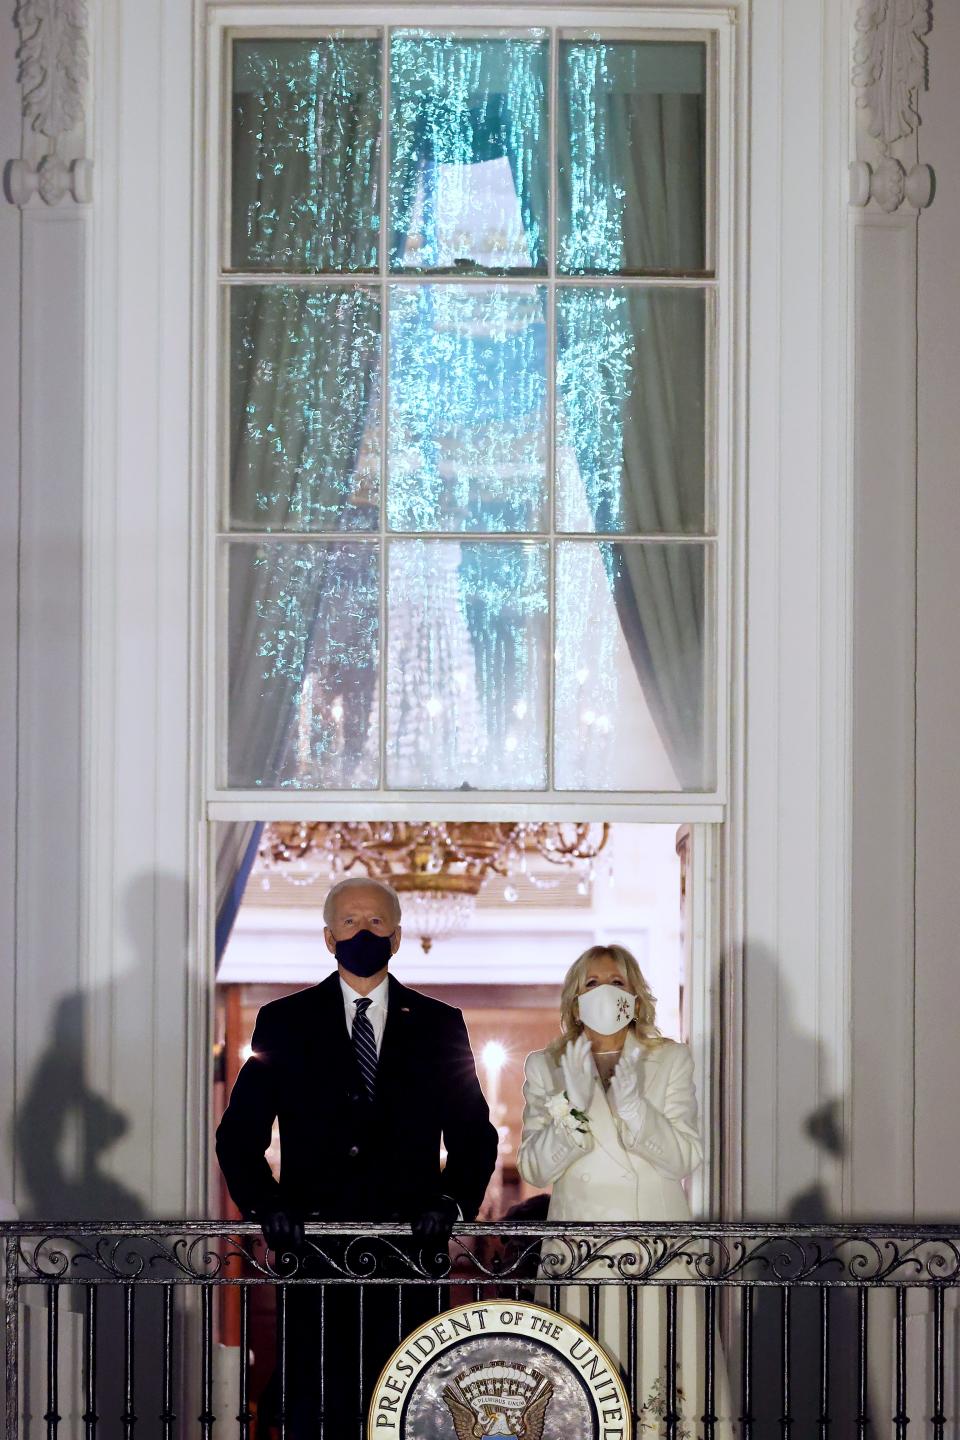 U.S. President Joe Biden and First Lady Dr. Jill Biden watch fireworks at the White House on January 20, 2021 in Washington, DC.  Biden became the 46th president of the United States earlier today during the ceremony at the U.S. Capitol.